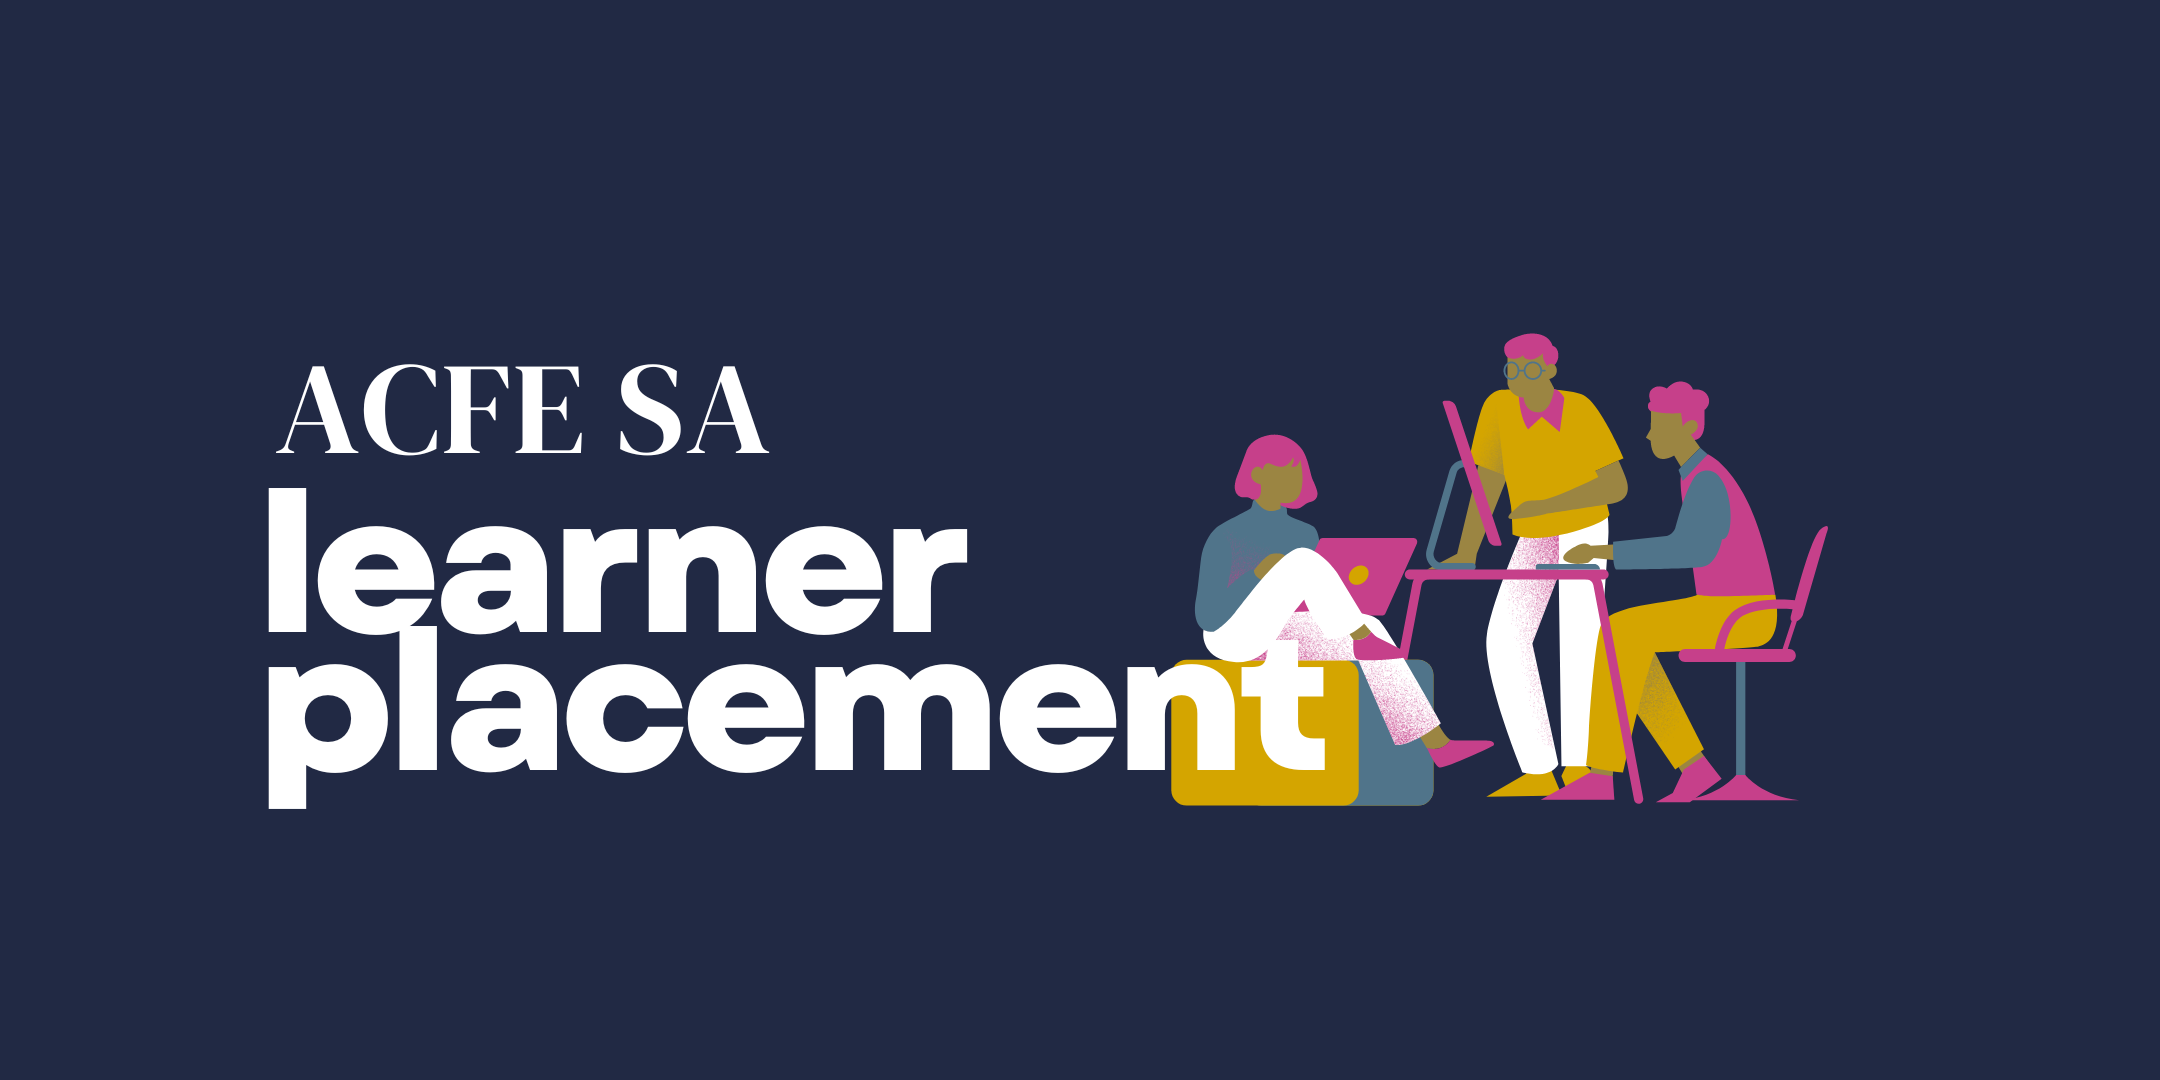 ACFE SA Learner Placement